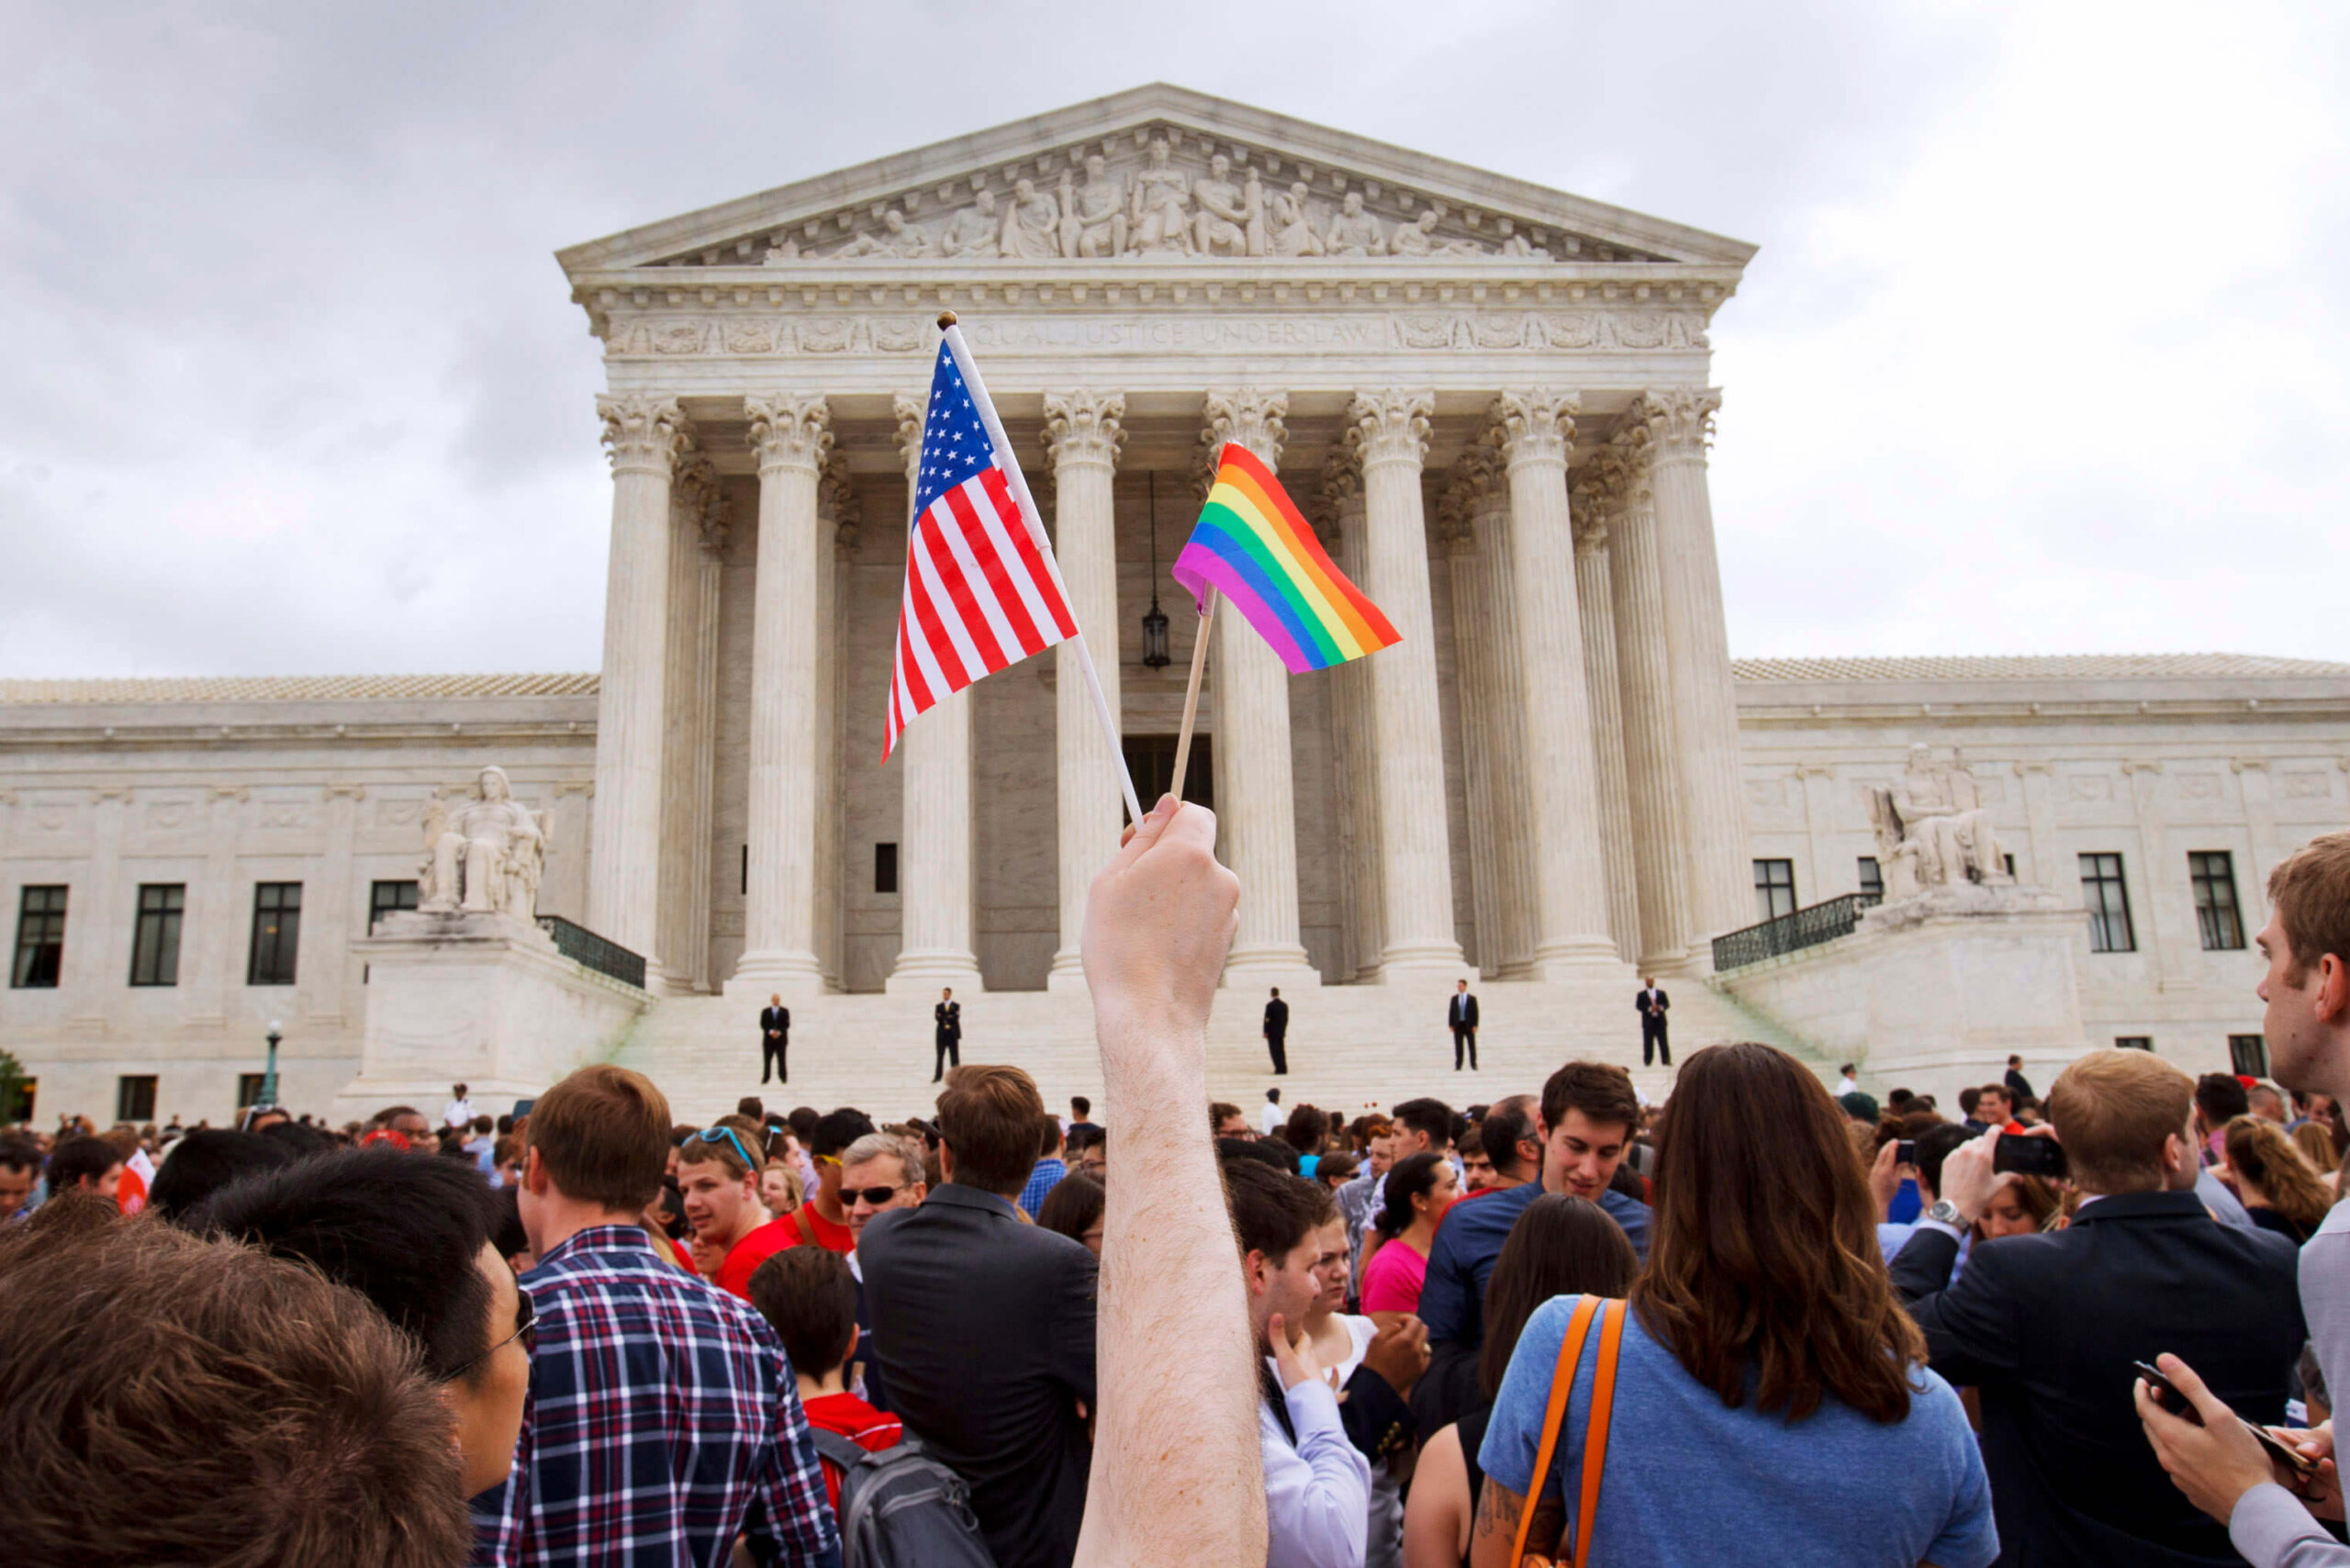 A man holds a U.S. and a rainbow flag outside the Supreme Court in Washington after the court legalized gay marriage nationwide.